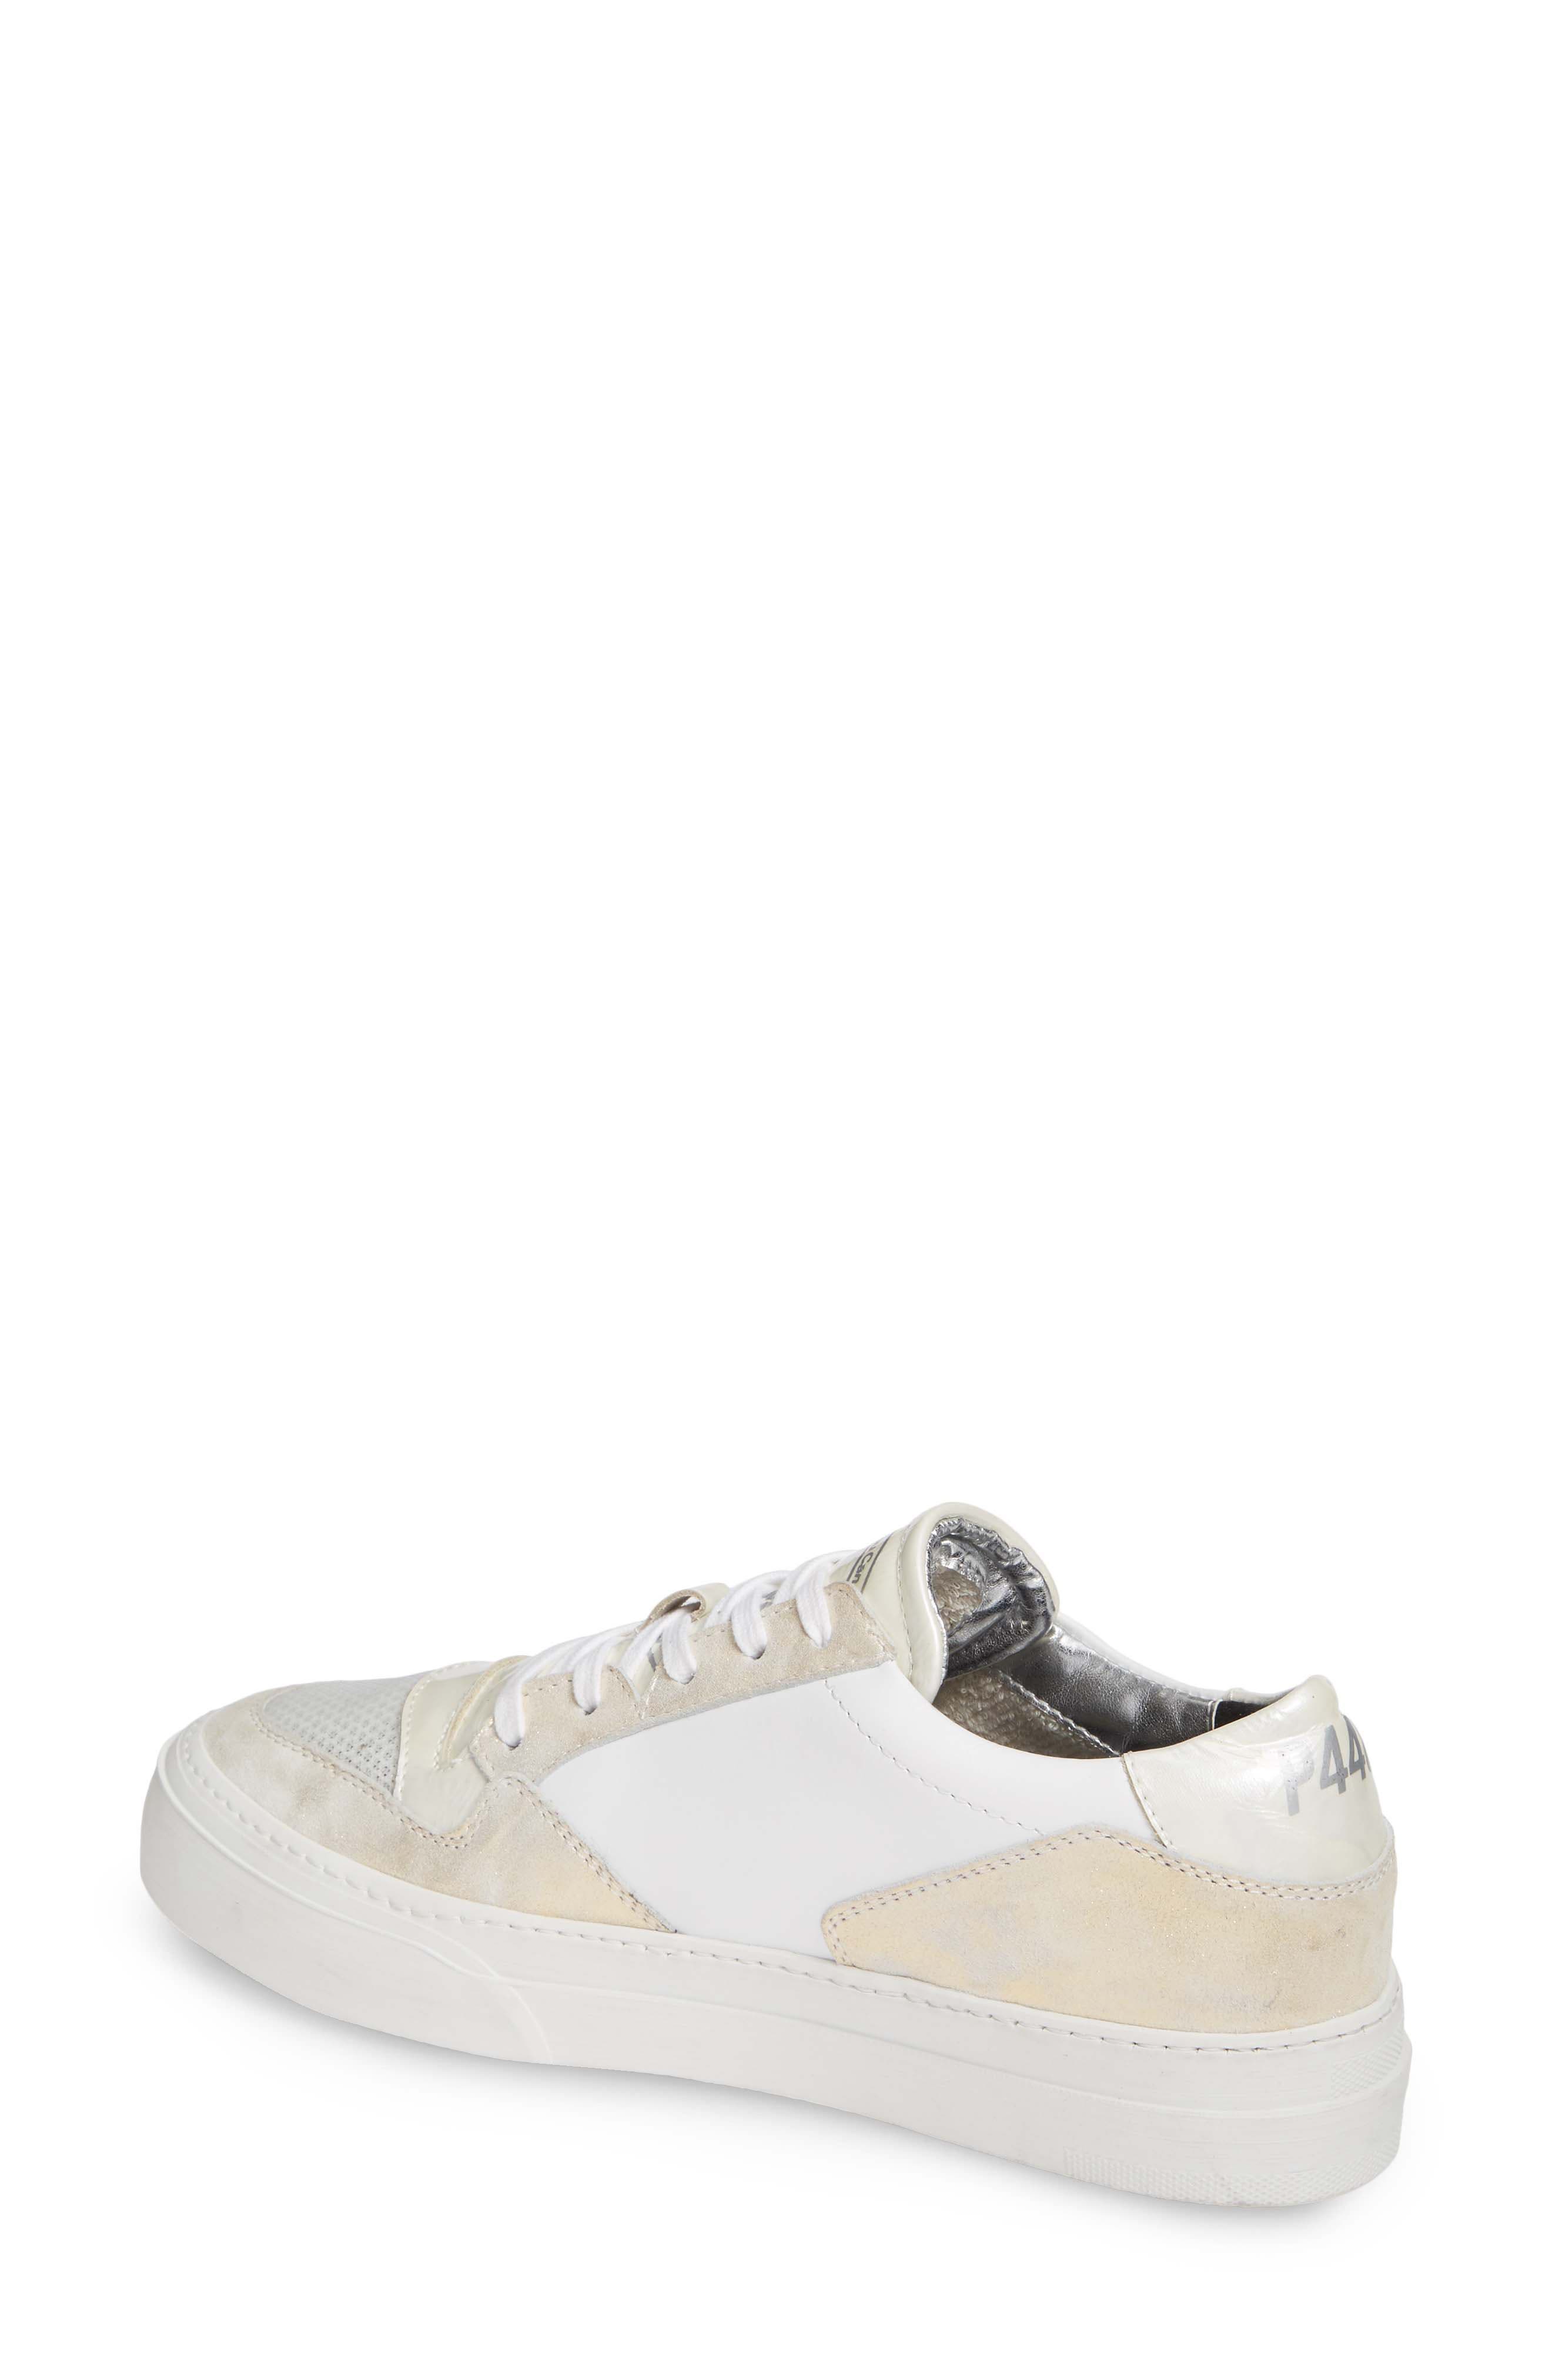 P448 | Space Leather Sneaker 